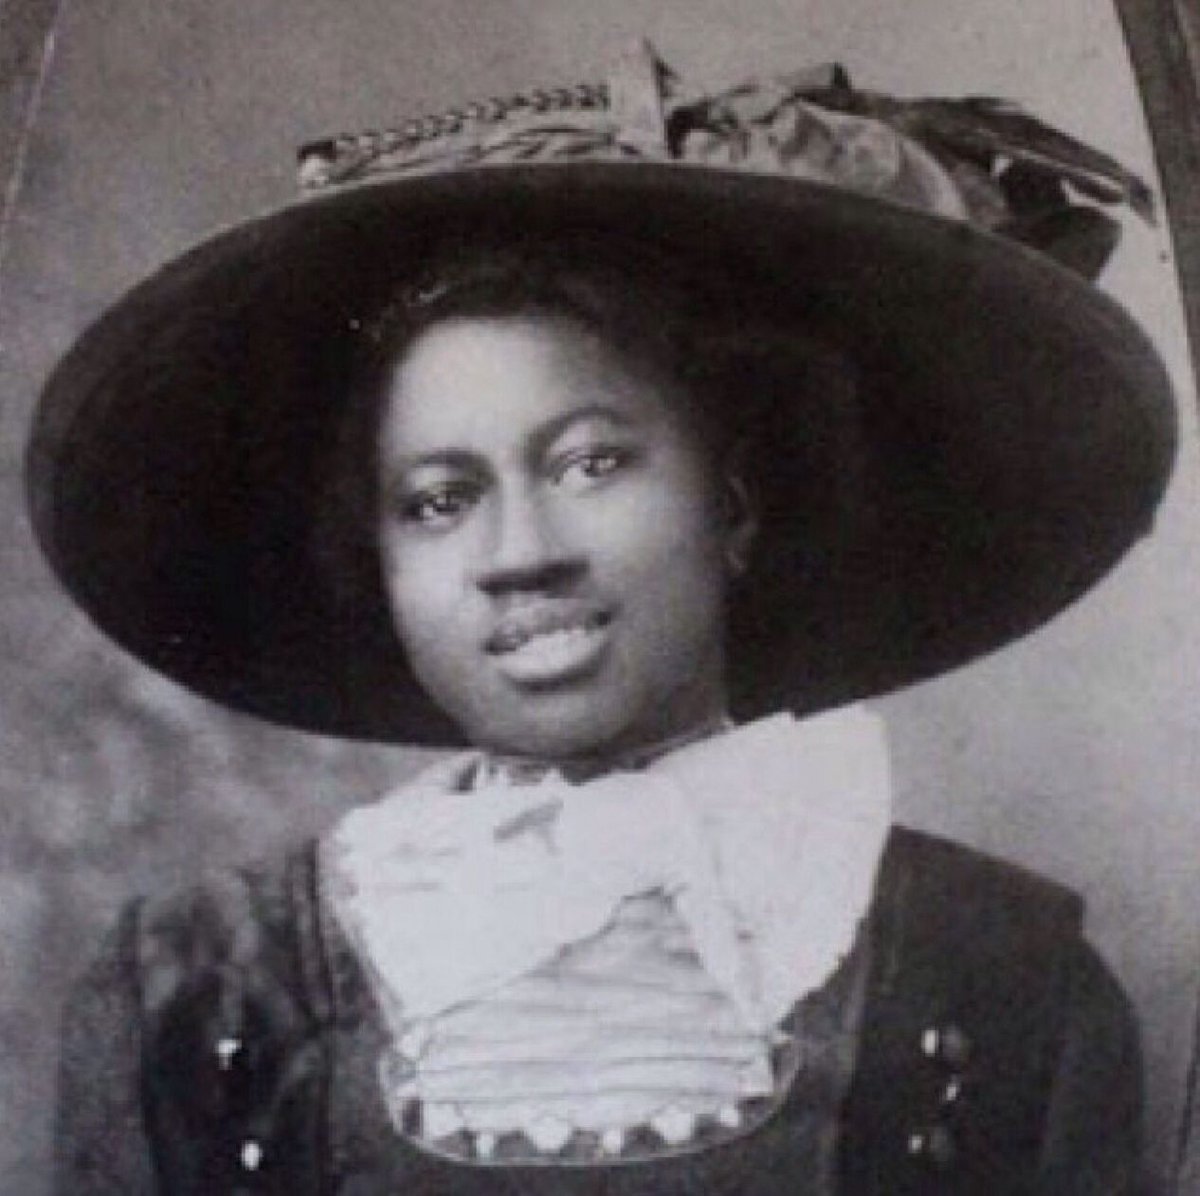 Hattie McDaniel knew she wanted to be an actress at 6 years old. The 13th child of 2 former slaves, McDaniel was born in Kansas in 1895, but raised in Denver. She said, “I knew that I could sing and dance, and my mother would give me a nickel sometimes to stop.”